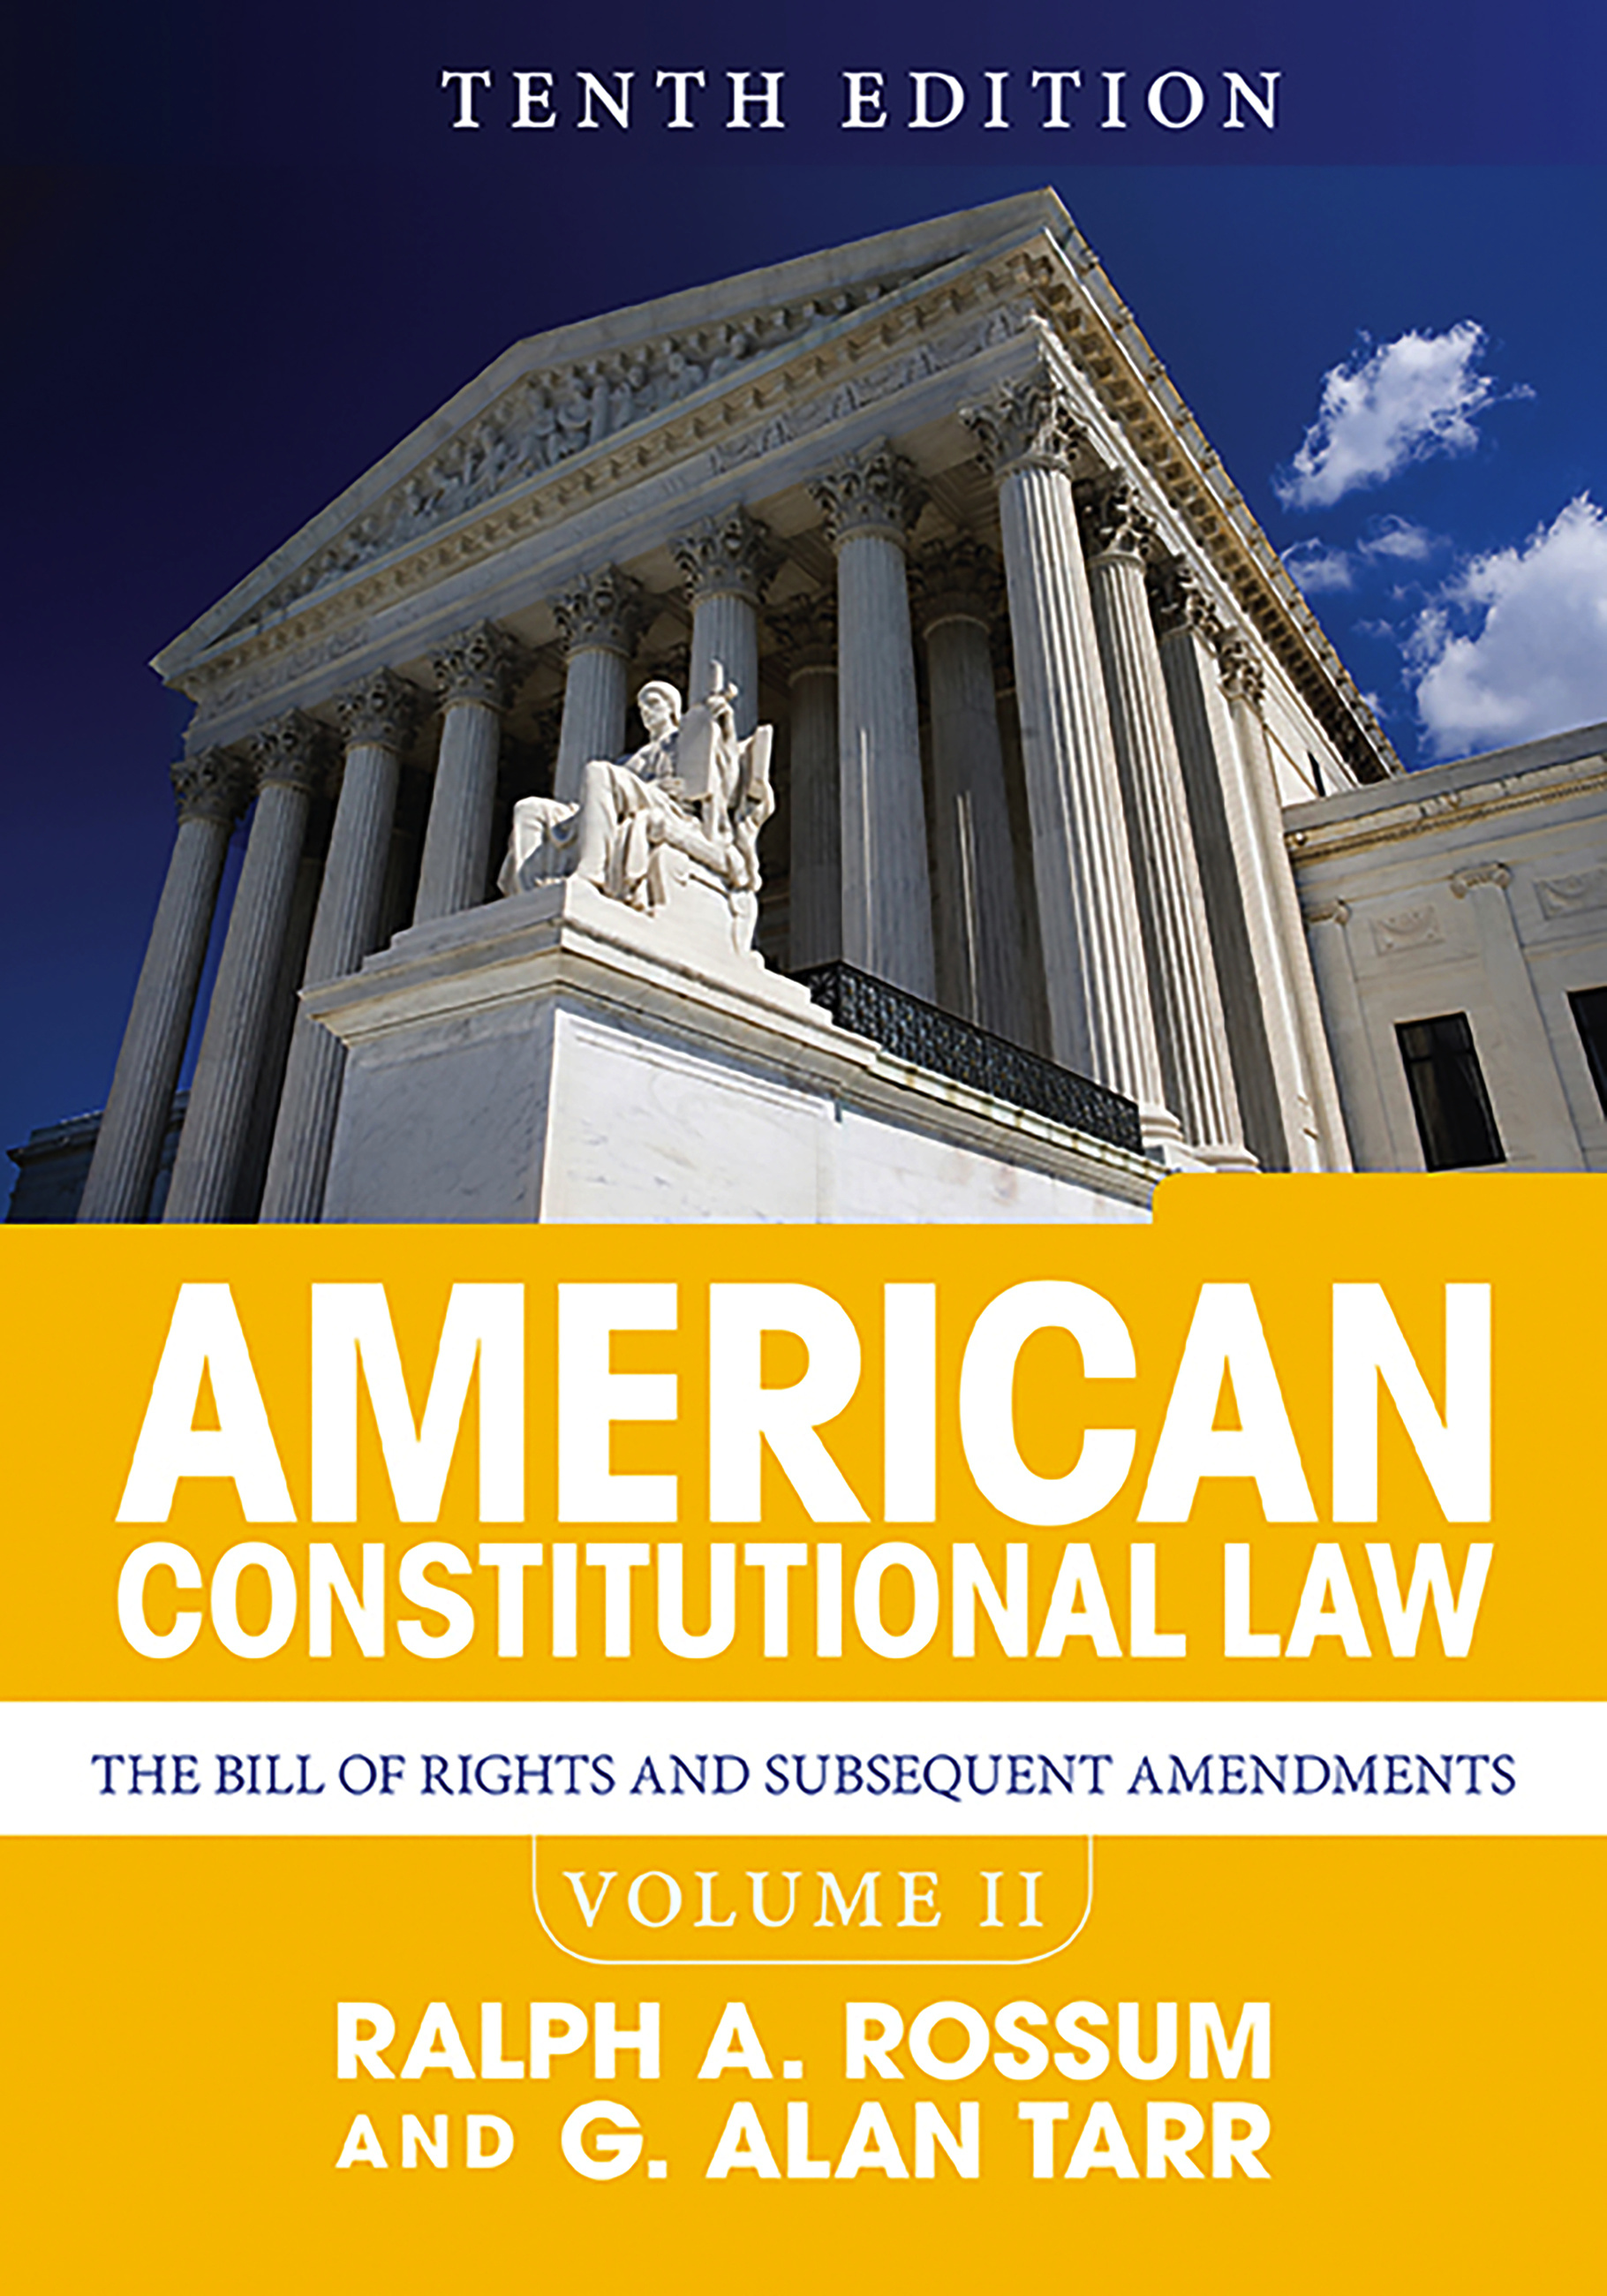 American Constitutional Law Volume Ii By Ralph A Rossum Hachette Book Group